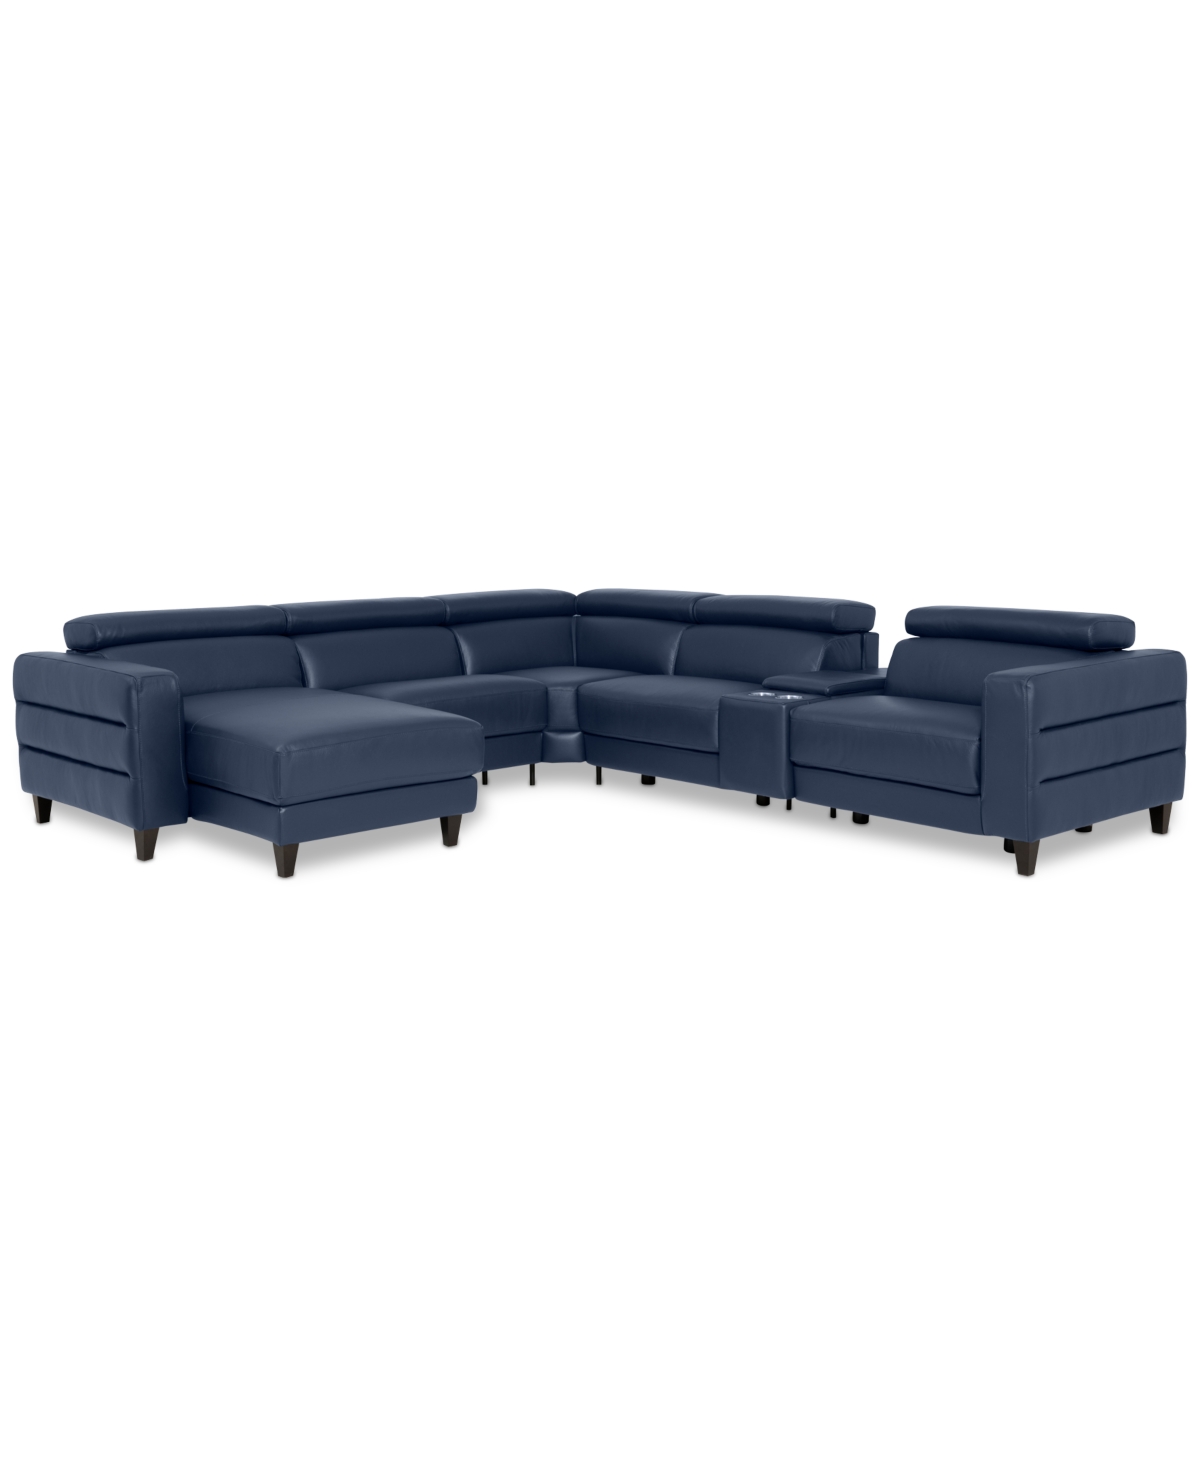 Shop Furniture Silvanah 6-pc. Leather Sectional With Storage Chaise And 2 Power Recliners And Console, Created For  In Sapphire